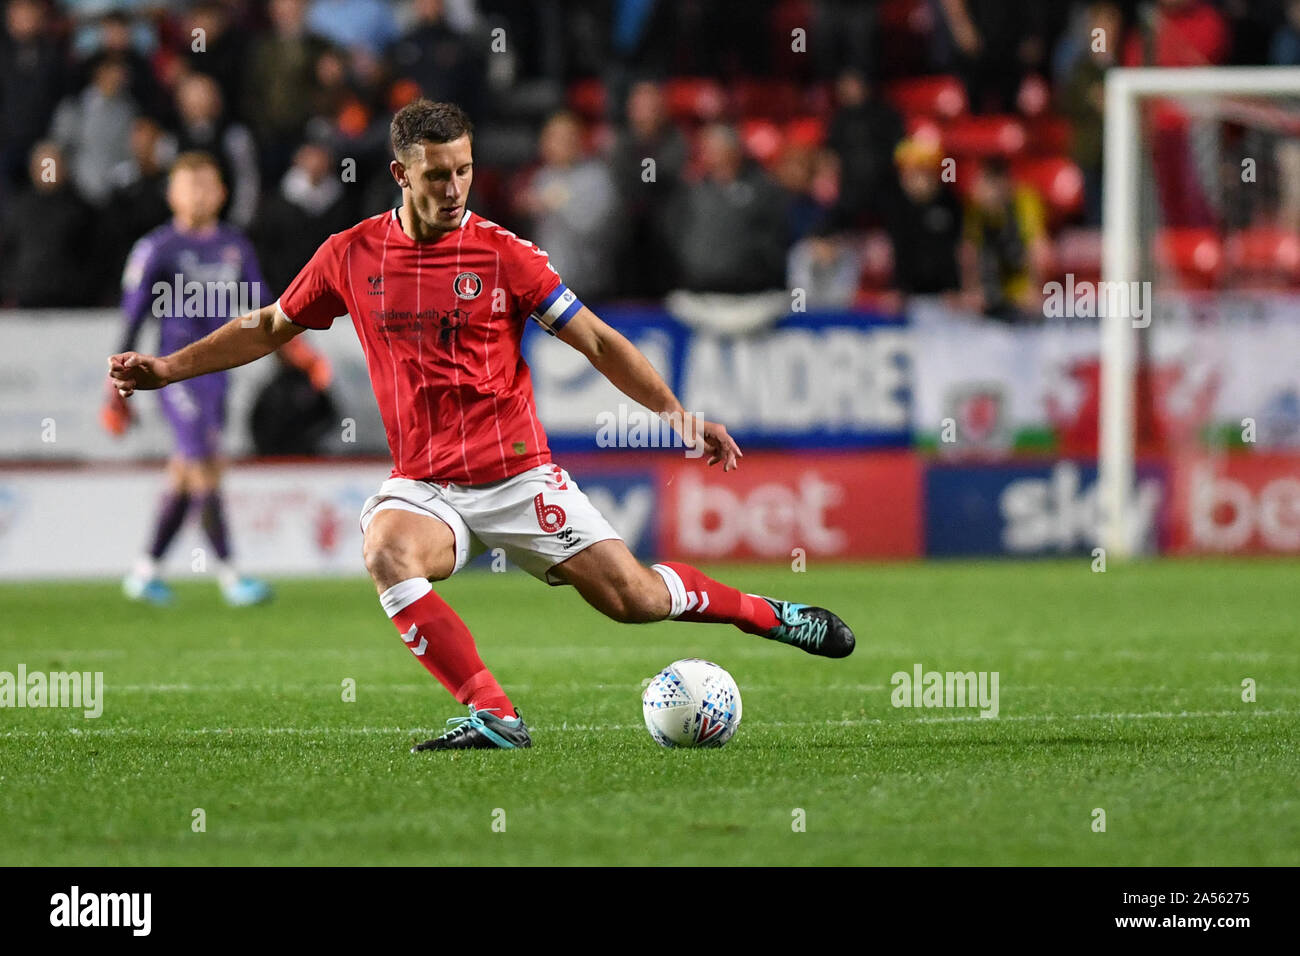 2nd October 2019, The Valley, London, England; Sky Bet Championship, Charlton Athletic v Swansea City :Jason Pearce (06) of Charlton with the ball  Credit: Phil Westlake/News Images Stock Photo